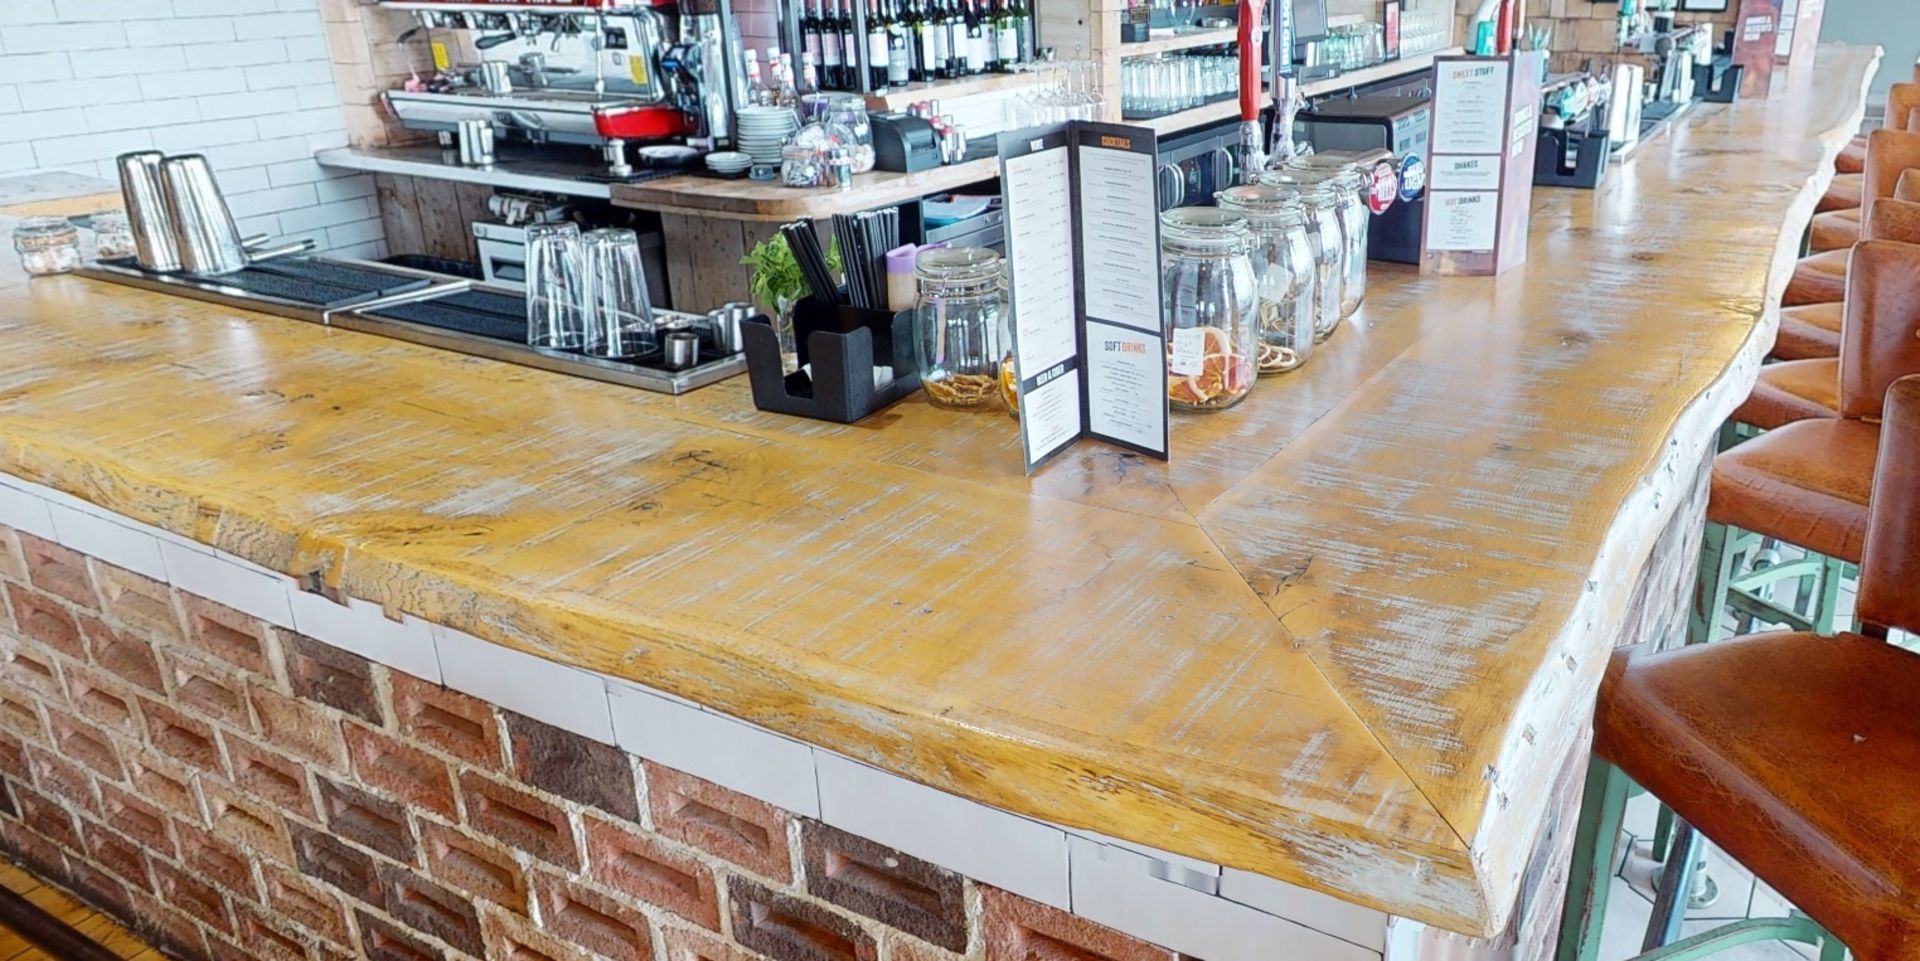 1 x Rustic Knotty Oak L Shaped Bar Top With an Earthy Finish and Live Edge - Approx 22ft in Legth!